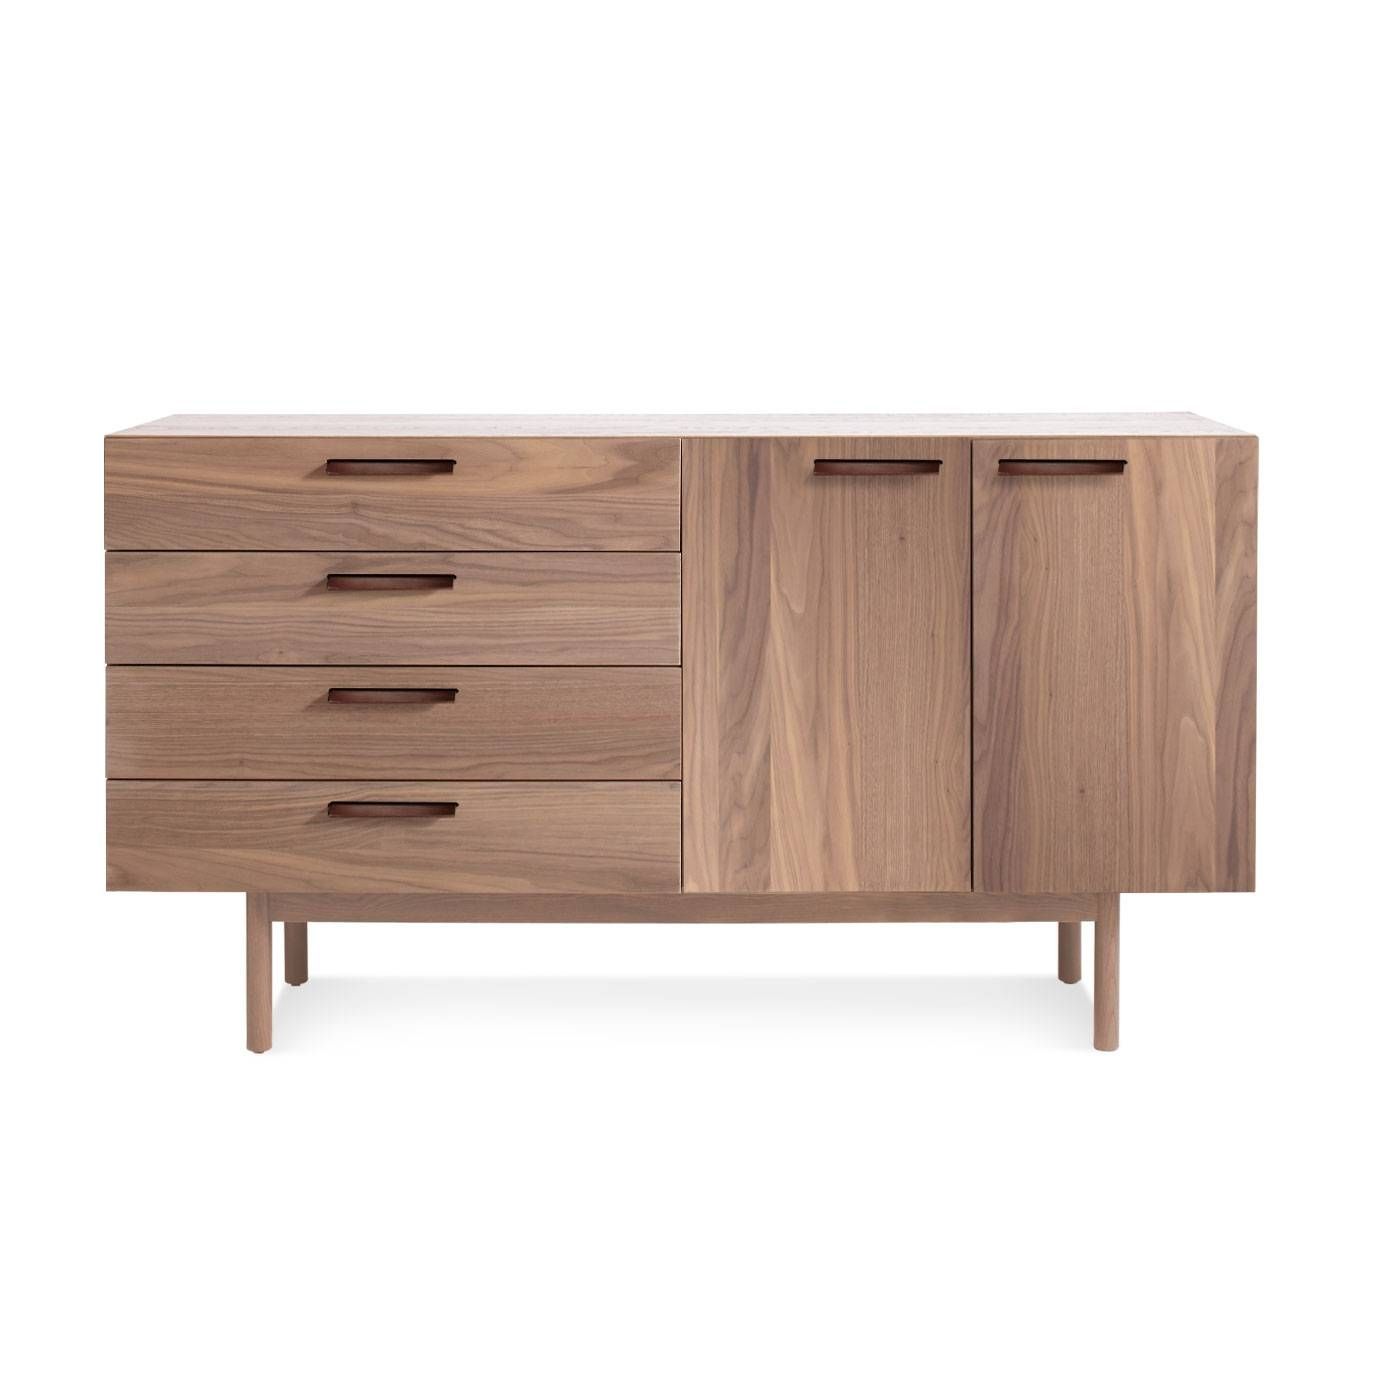 Shale 4 Drawer / 2 Door Modern Wood Sideboard | Blu Dot For Fully Assembled Sideboards (View 24 of 30)